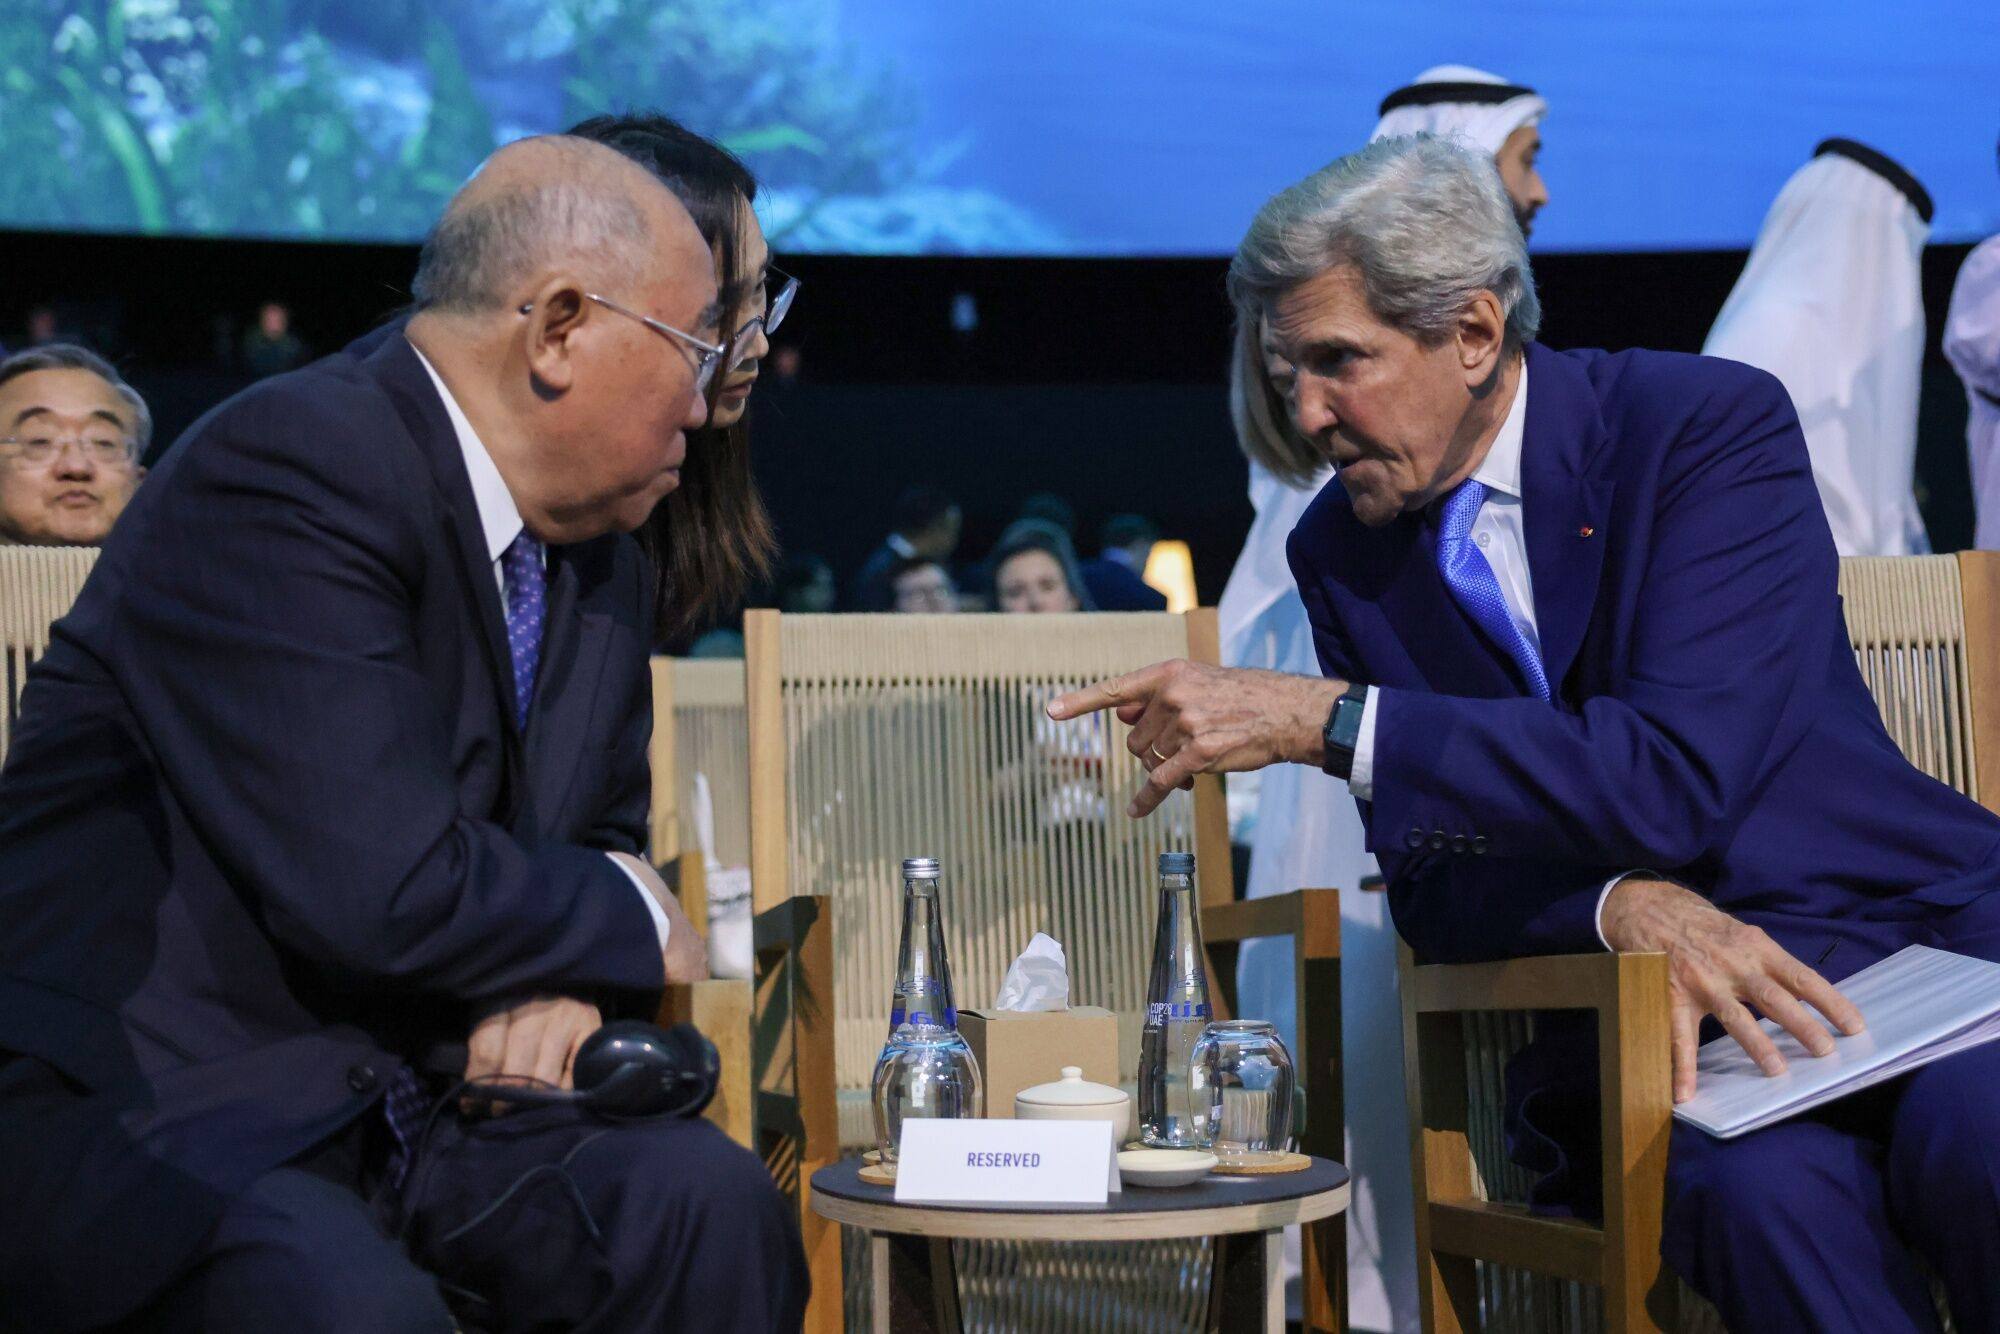 Xie Zhenhua, China’s special envoy for climate change, and John Kerry, US special presidential envoy for climate, speak at the COP28 conference in Dubai on December 2. Photo: Bloomberg